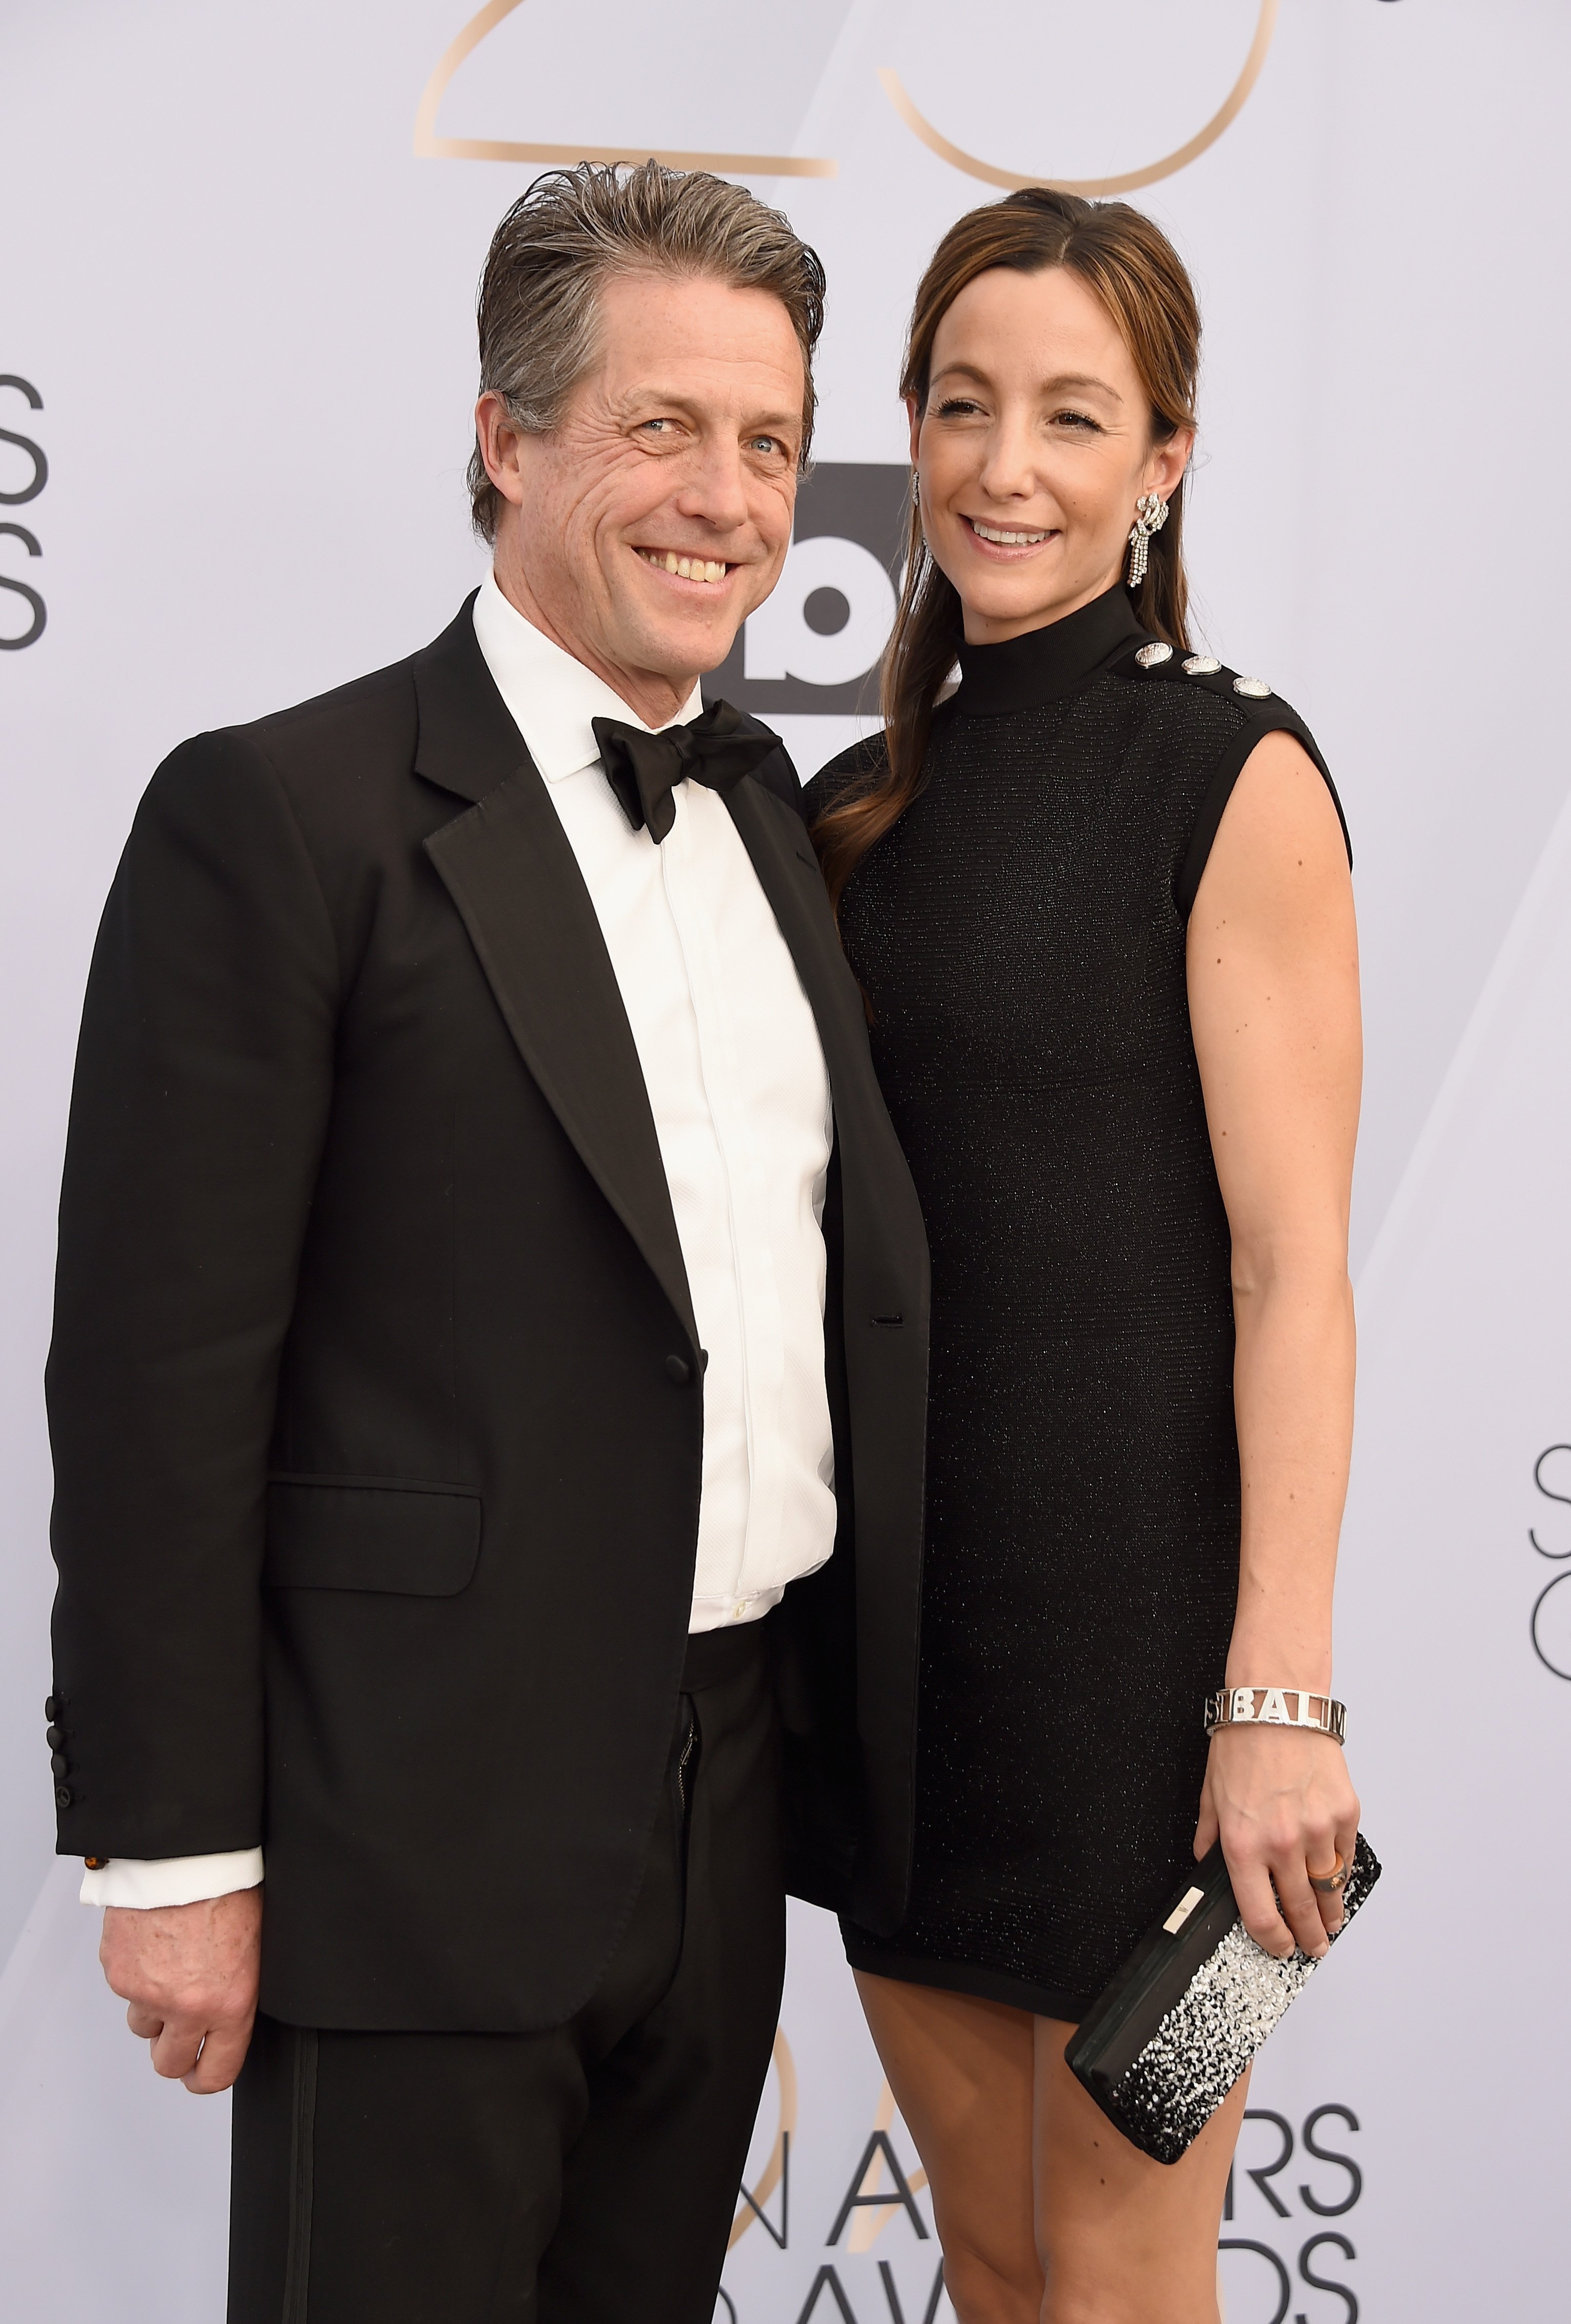 Hugh Grant and his wife Anna Eberstein at the 25th Annual Screen Actors Guild Awards on January 27, 2019, in Los Angeles, California. | Source: Getty Images